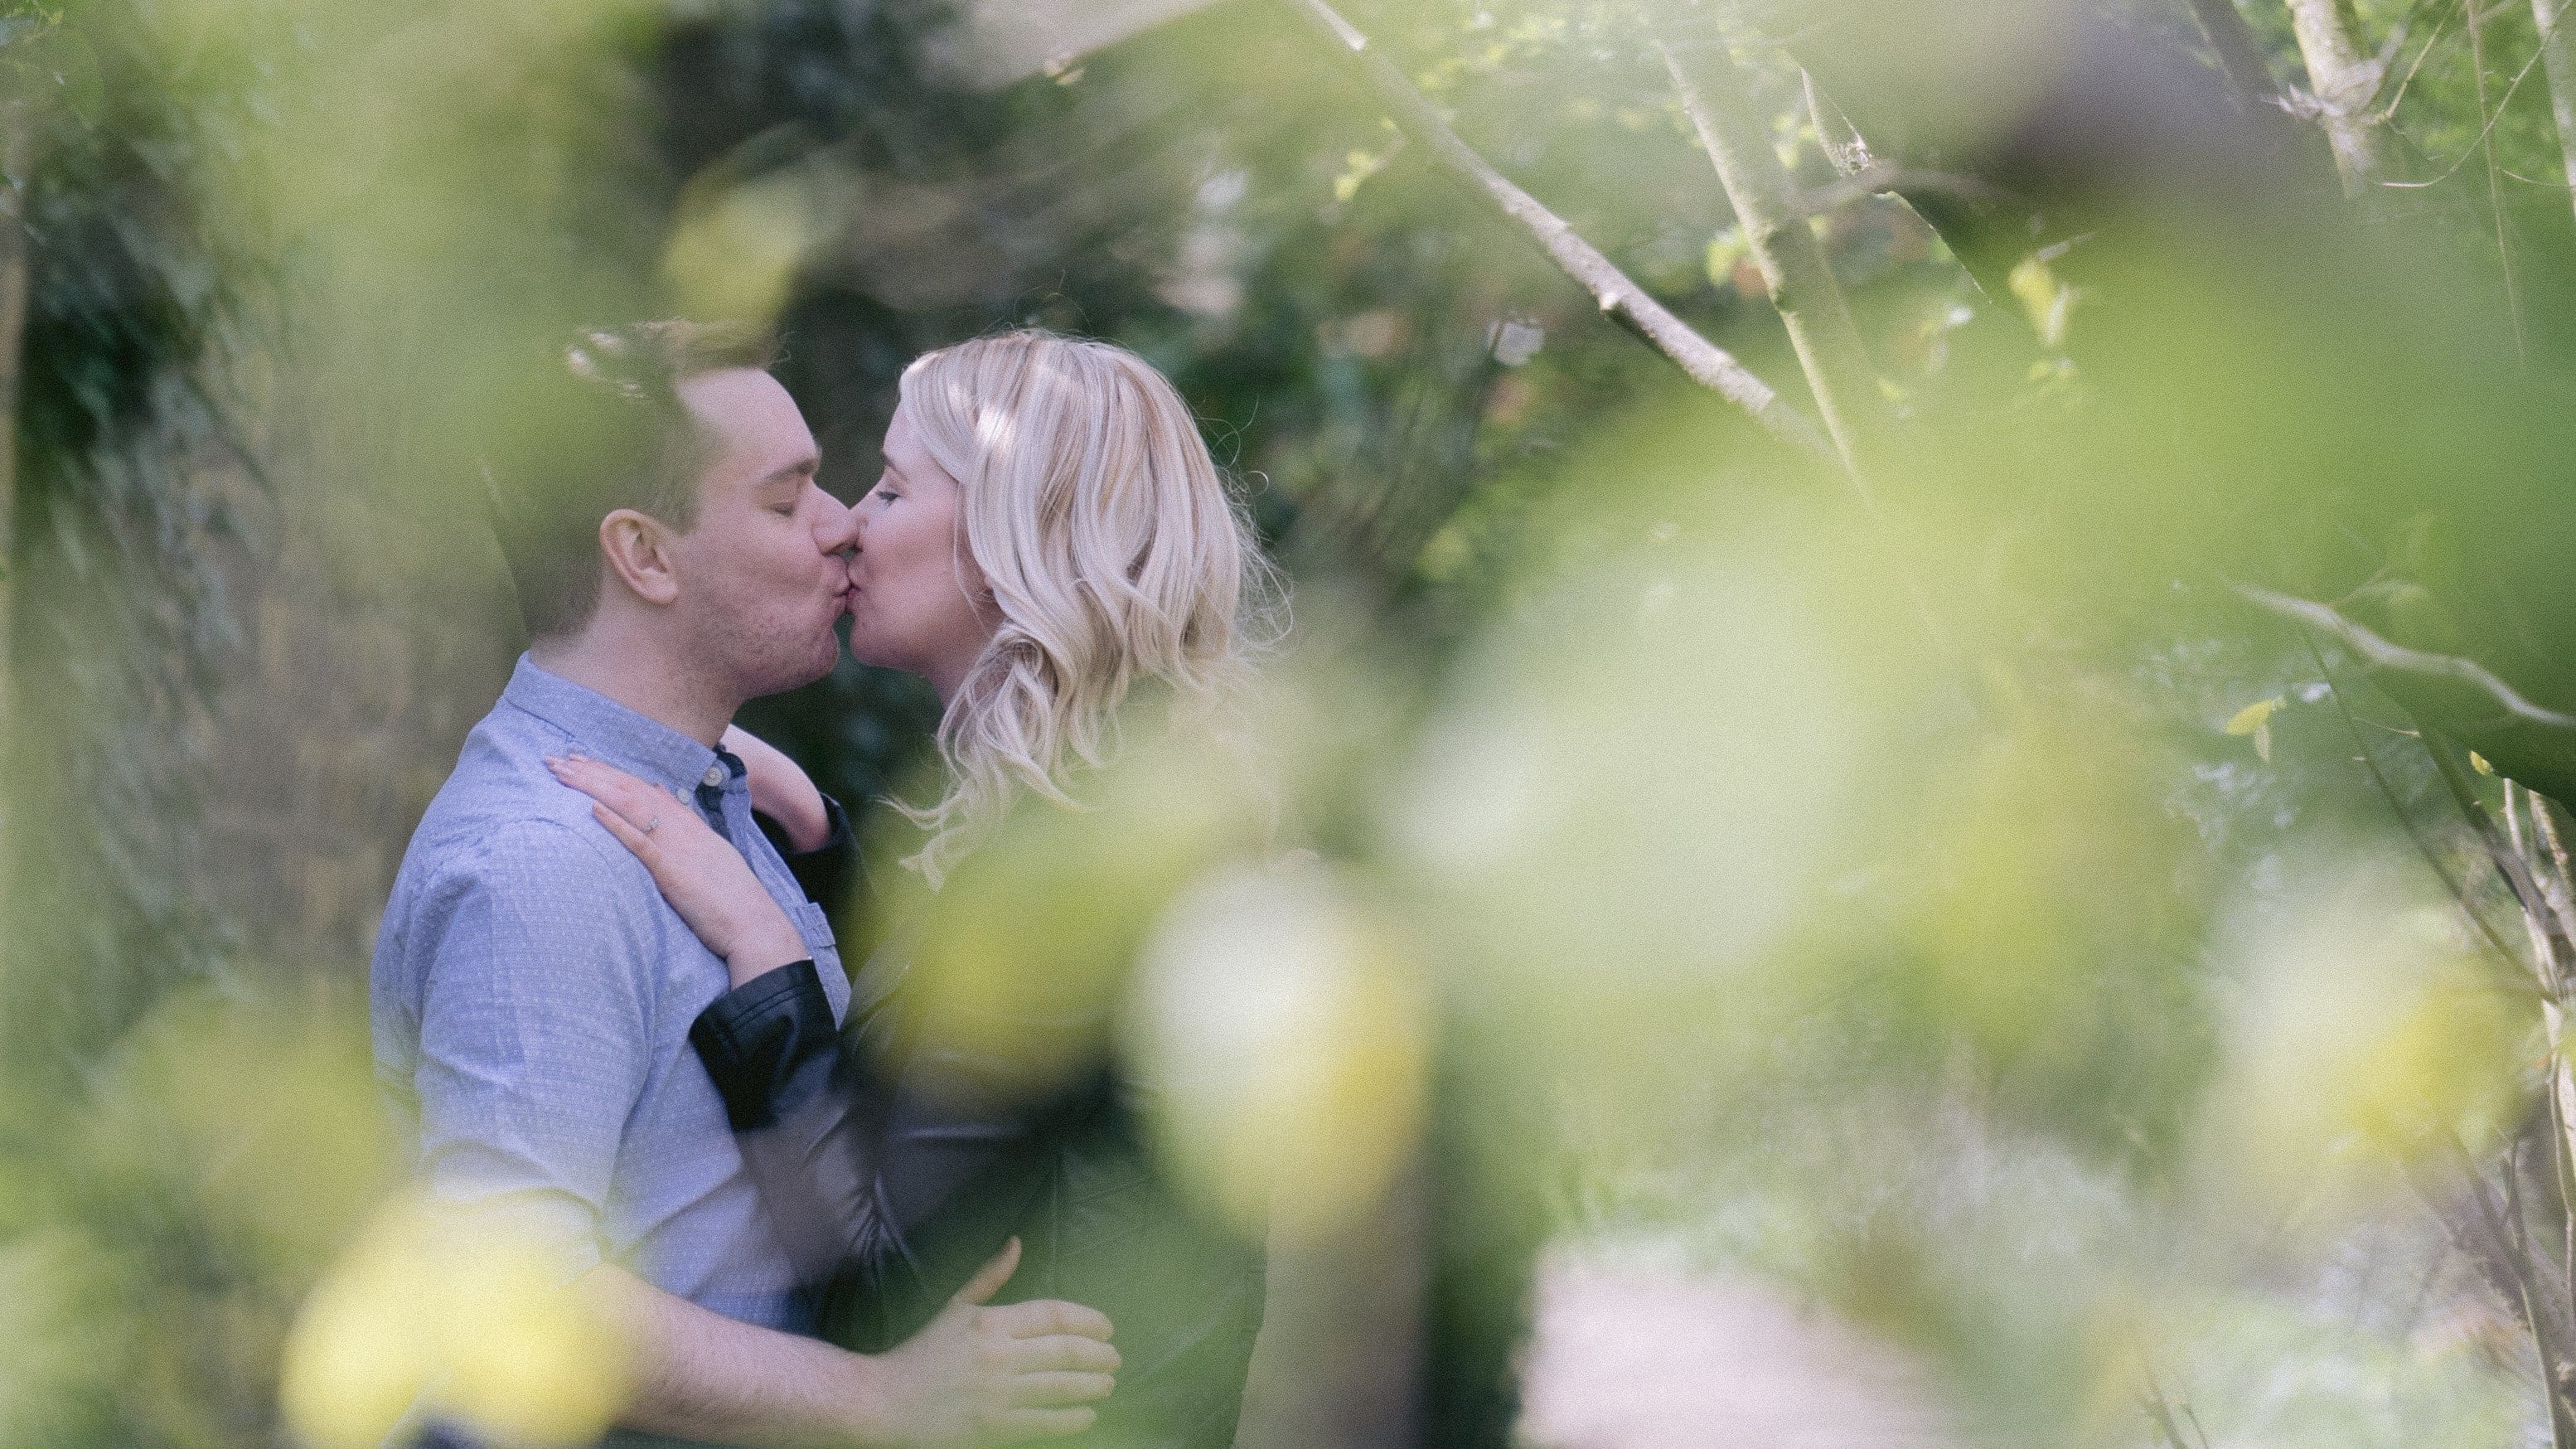 A tender moment captured among the greenery at Oakwell Hall Country Park as a couple shares a kiss, partially veiled by soft-focus foliage during their sunny couple shoot.